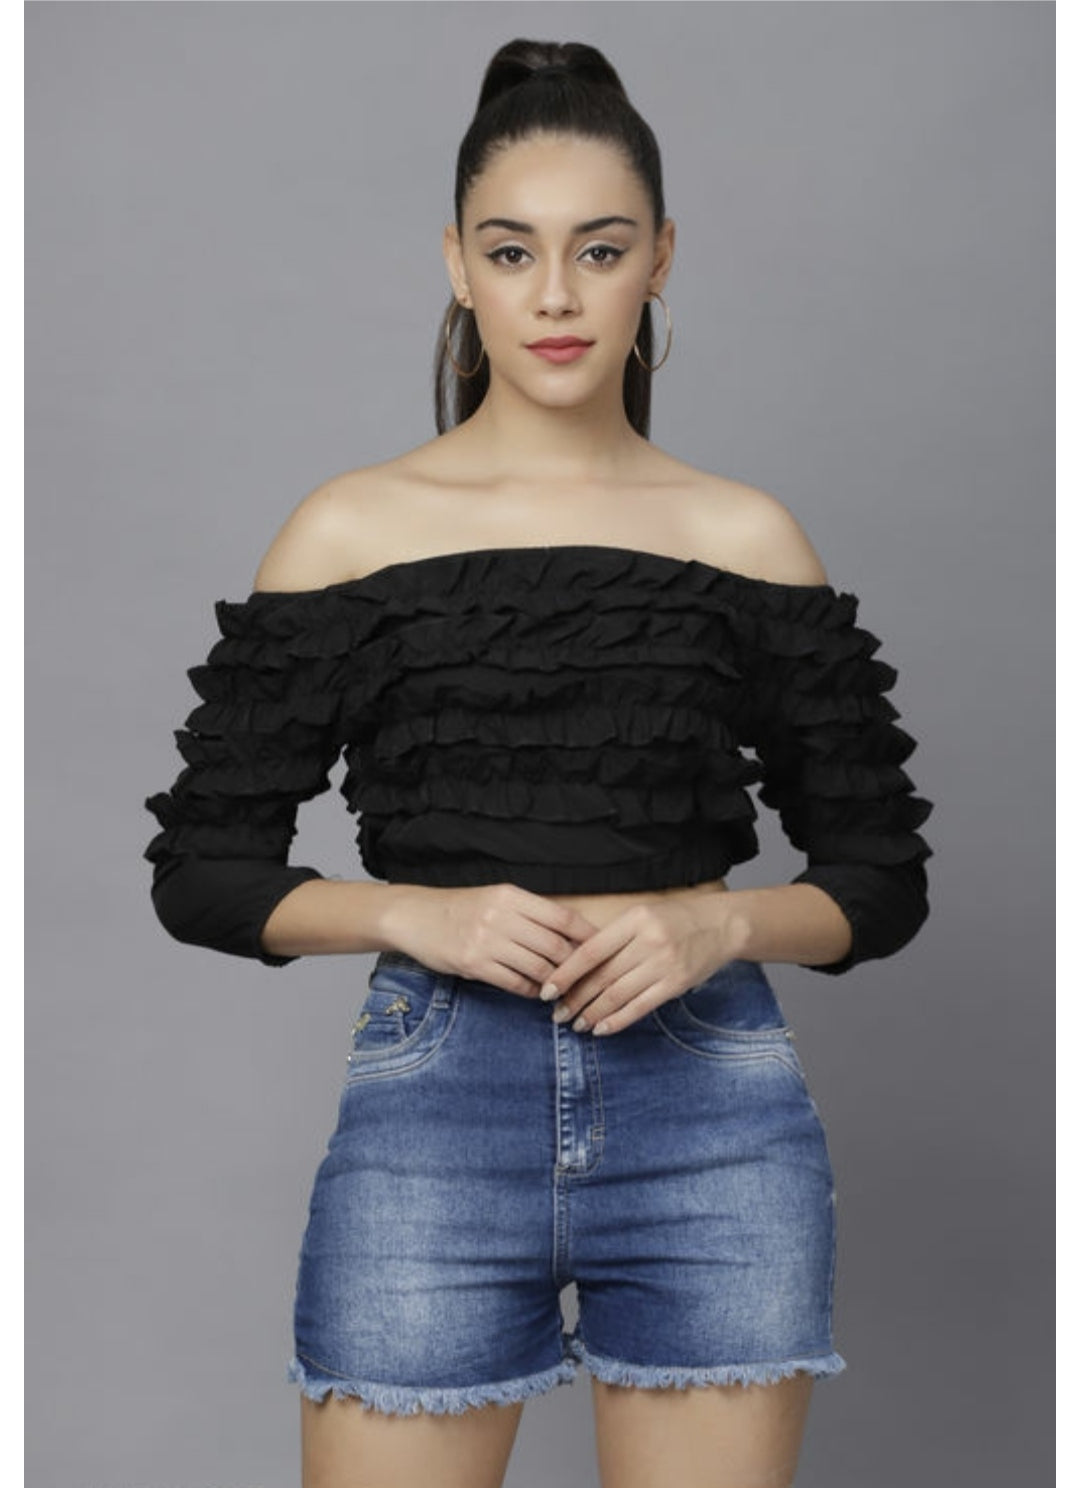 Imported Stylish Crepe Top For Women.